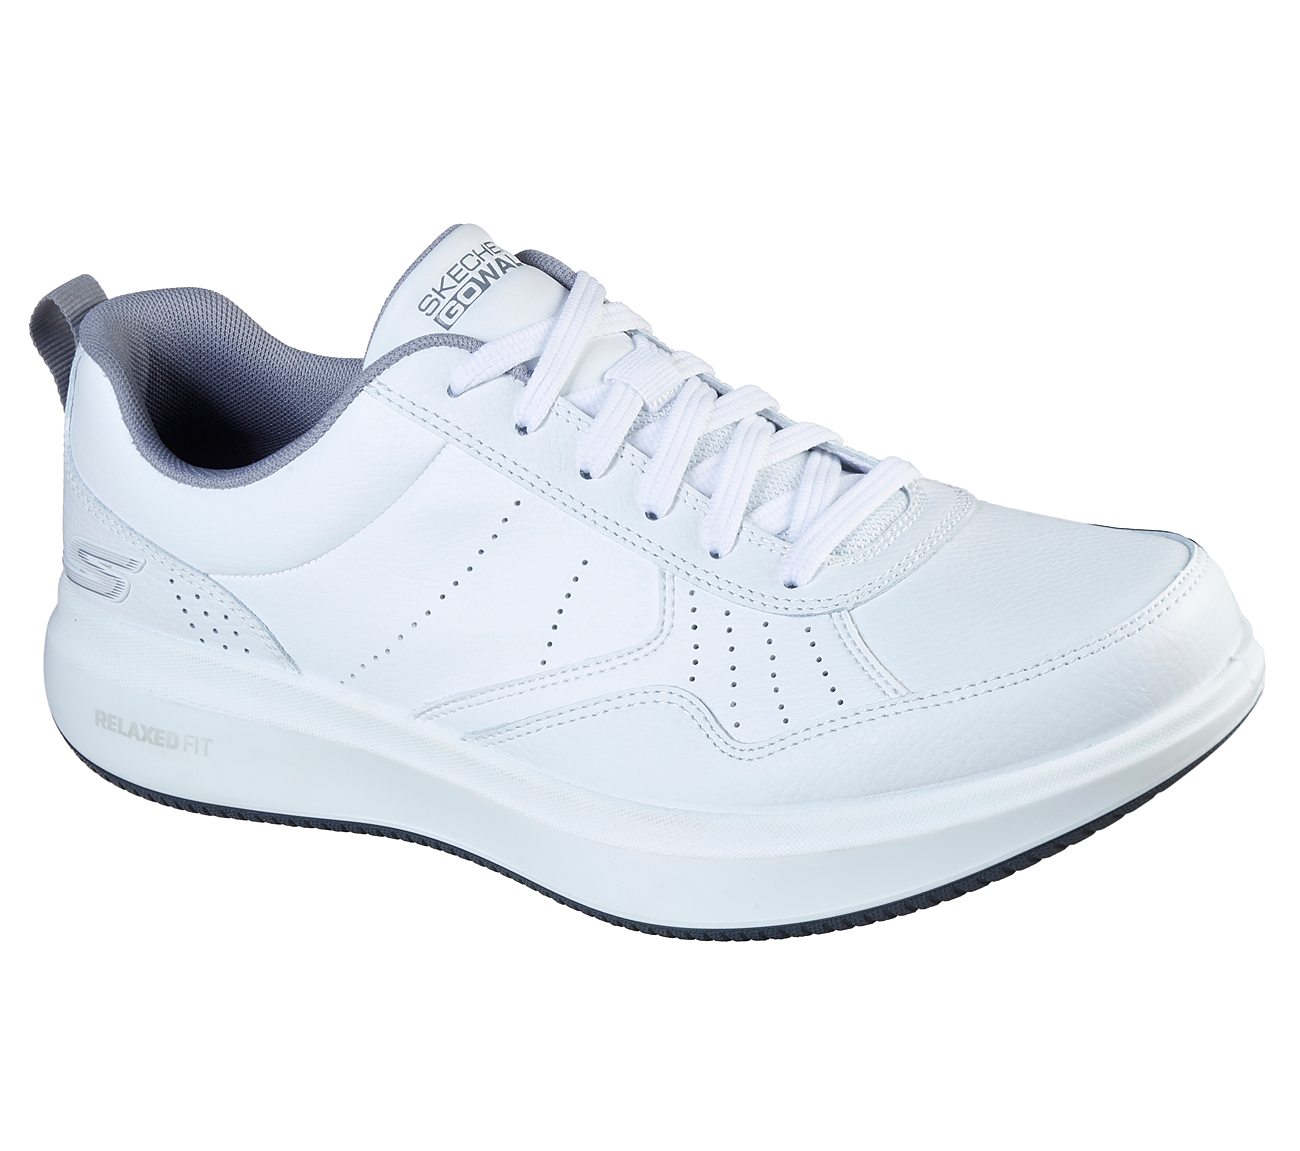 Chaussures pour homme SKECHERS GOwalk Steady #216000